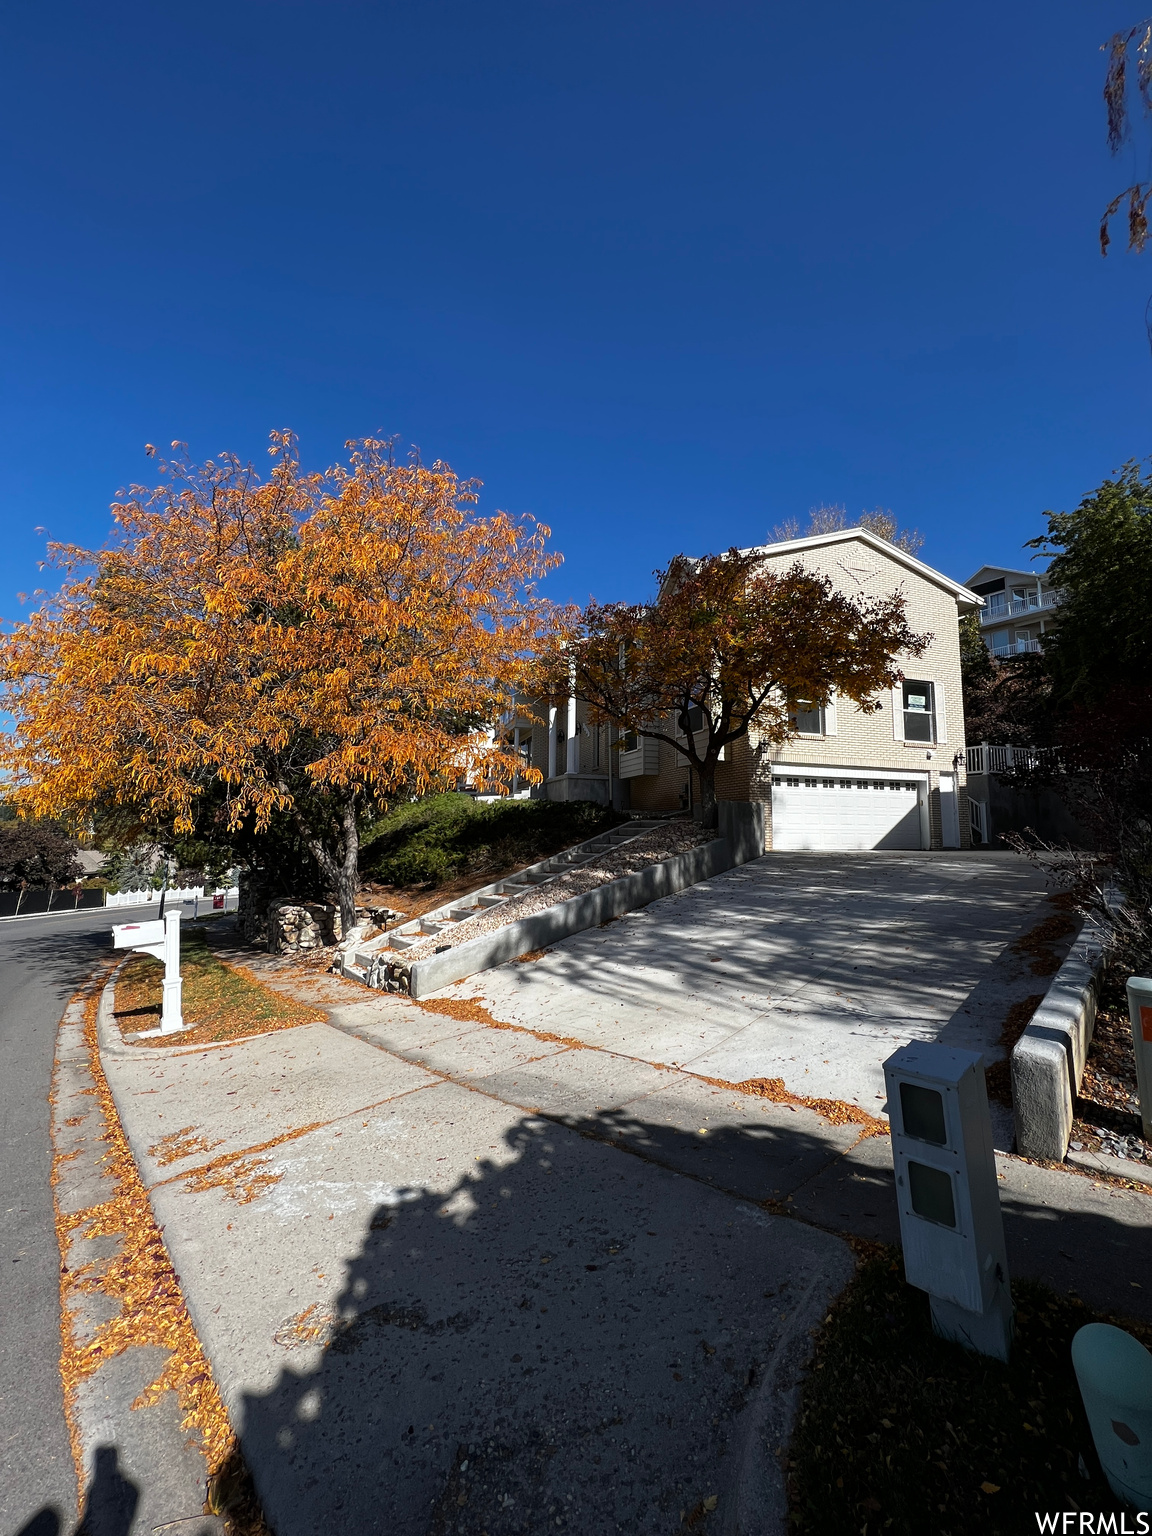 1001 S LAKEVIEW, Bountiful, Utah 84010, 6 Bedrooms Bedrooms, 21 Rooms Rooms,2 BathroomsBathrooms,Residential,For sale,LAKEVIEW,1971092